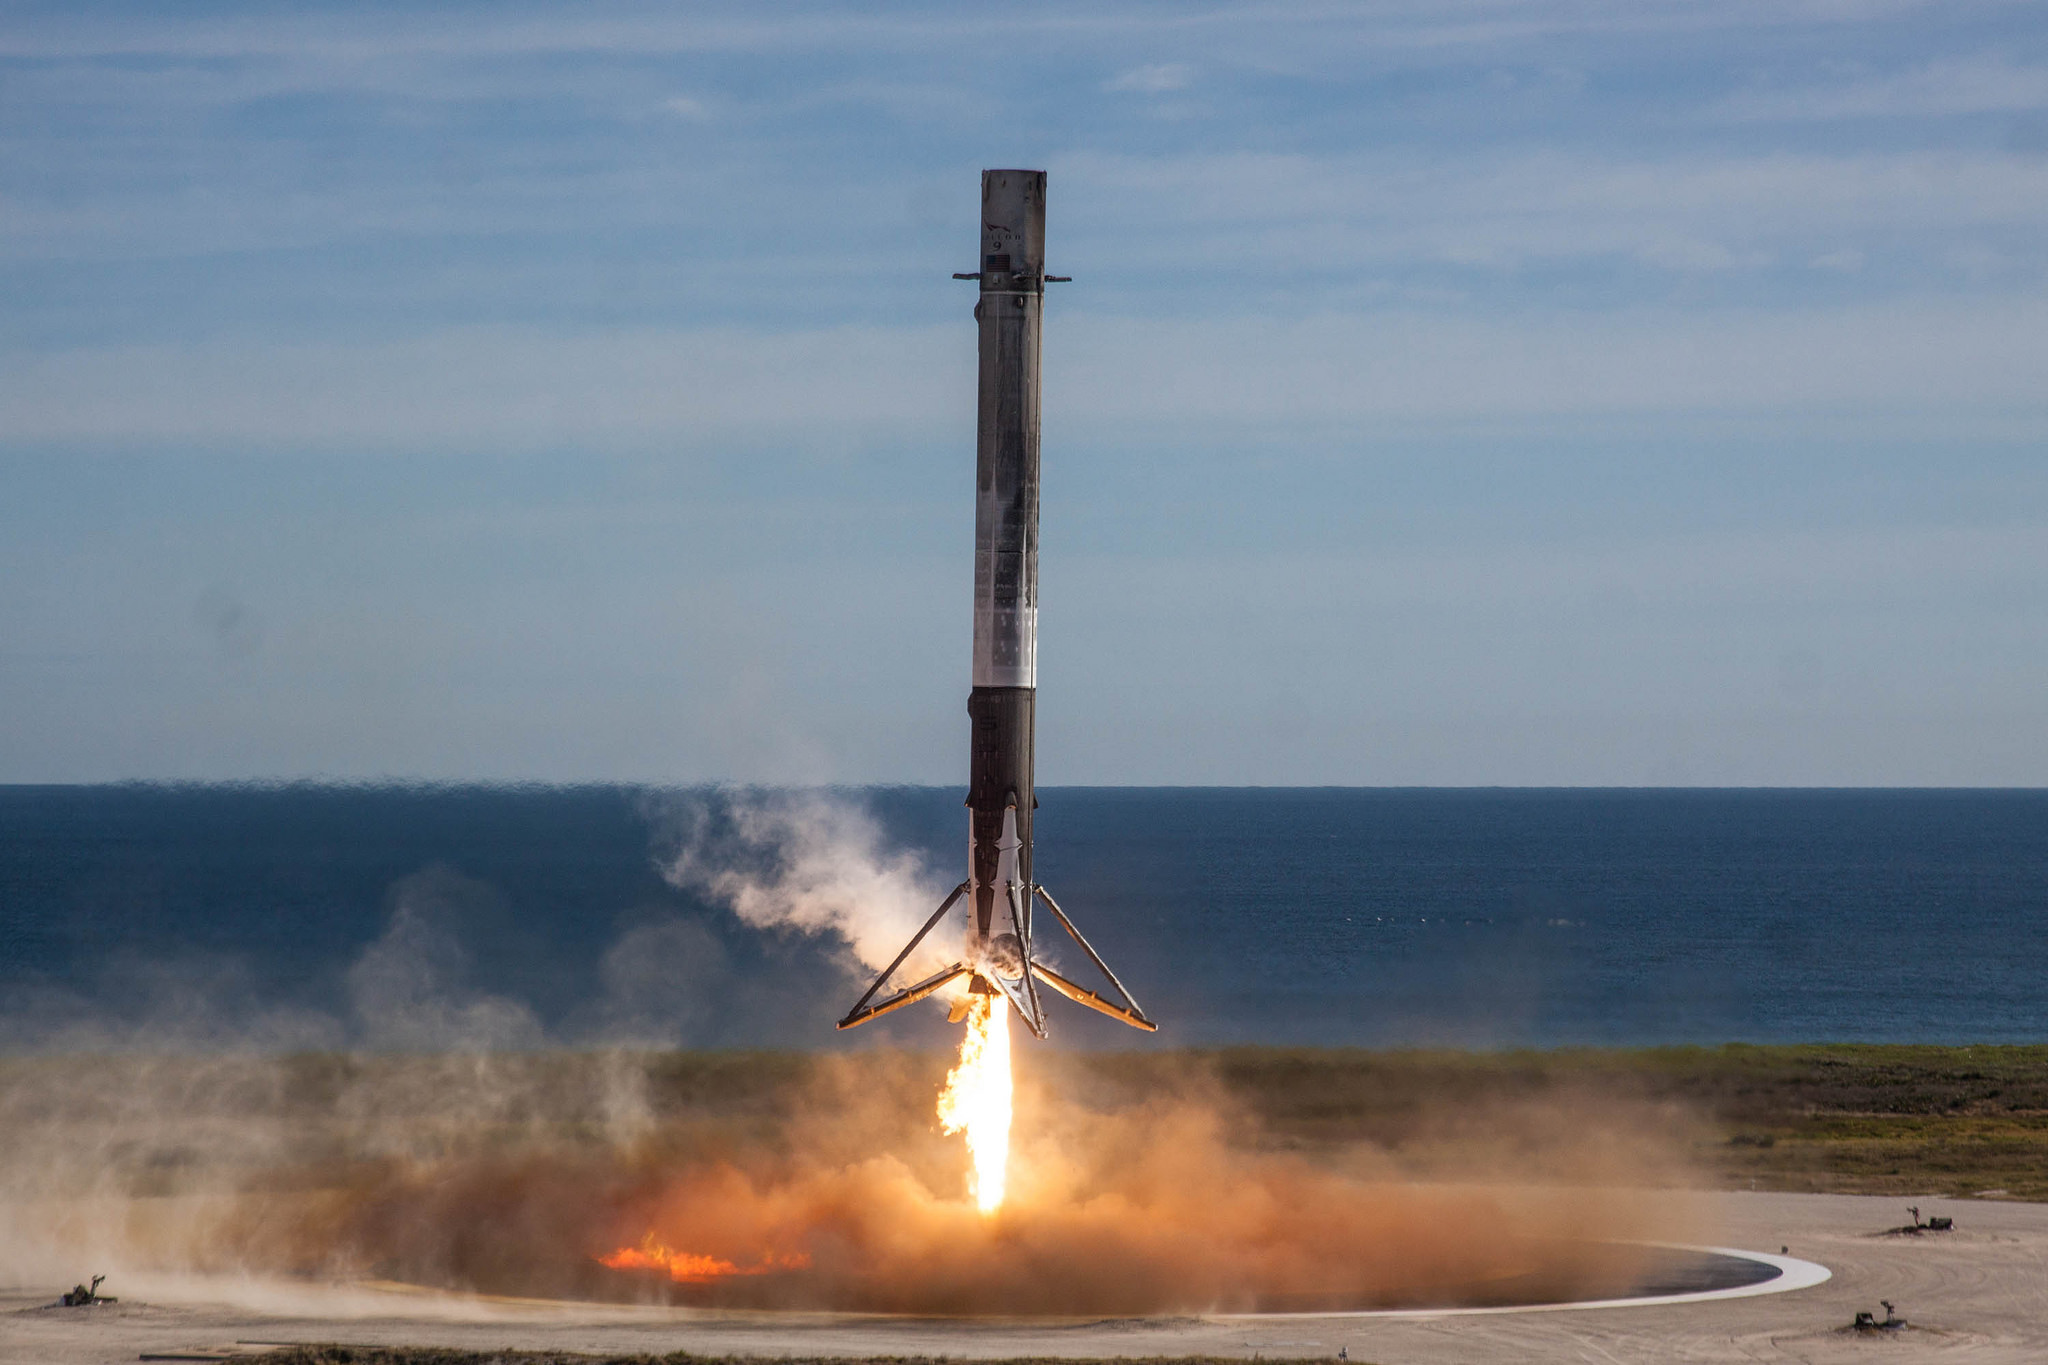 To date, SpaceX has landed and re-flown 11 Falcon 9 rockets. But none has flown more than twice.